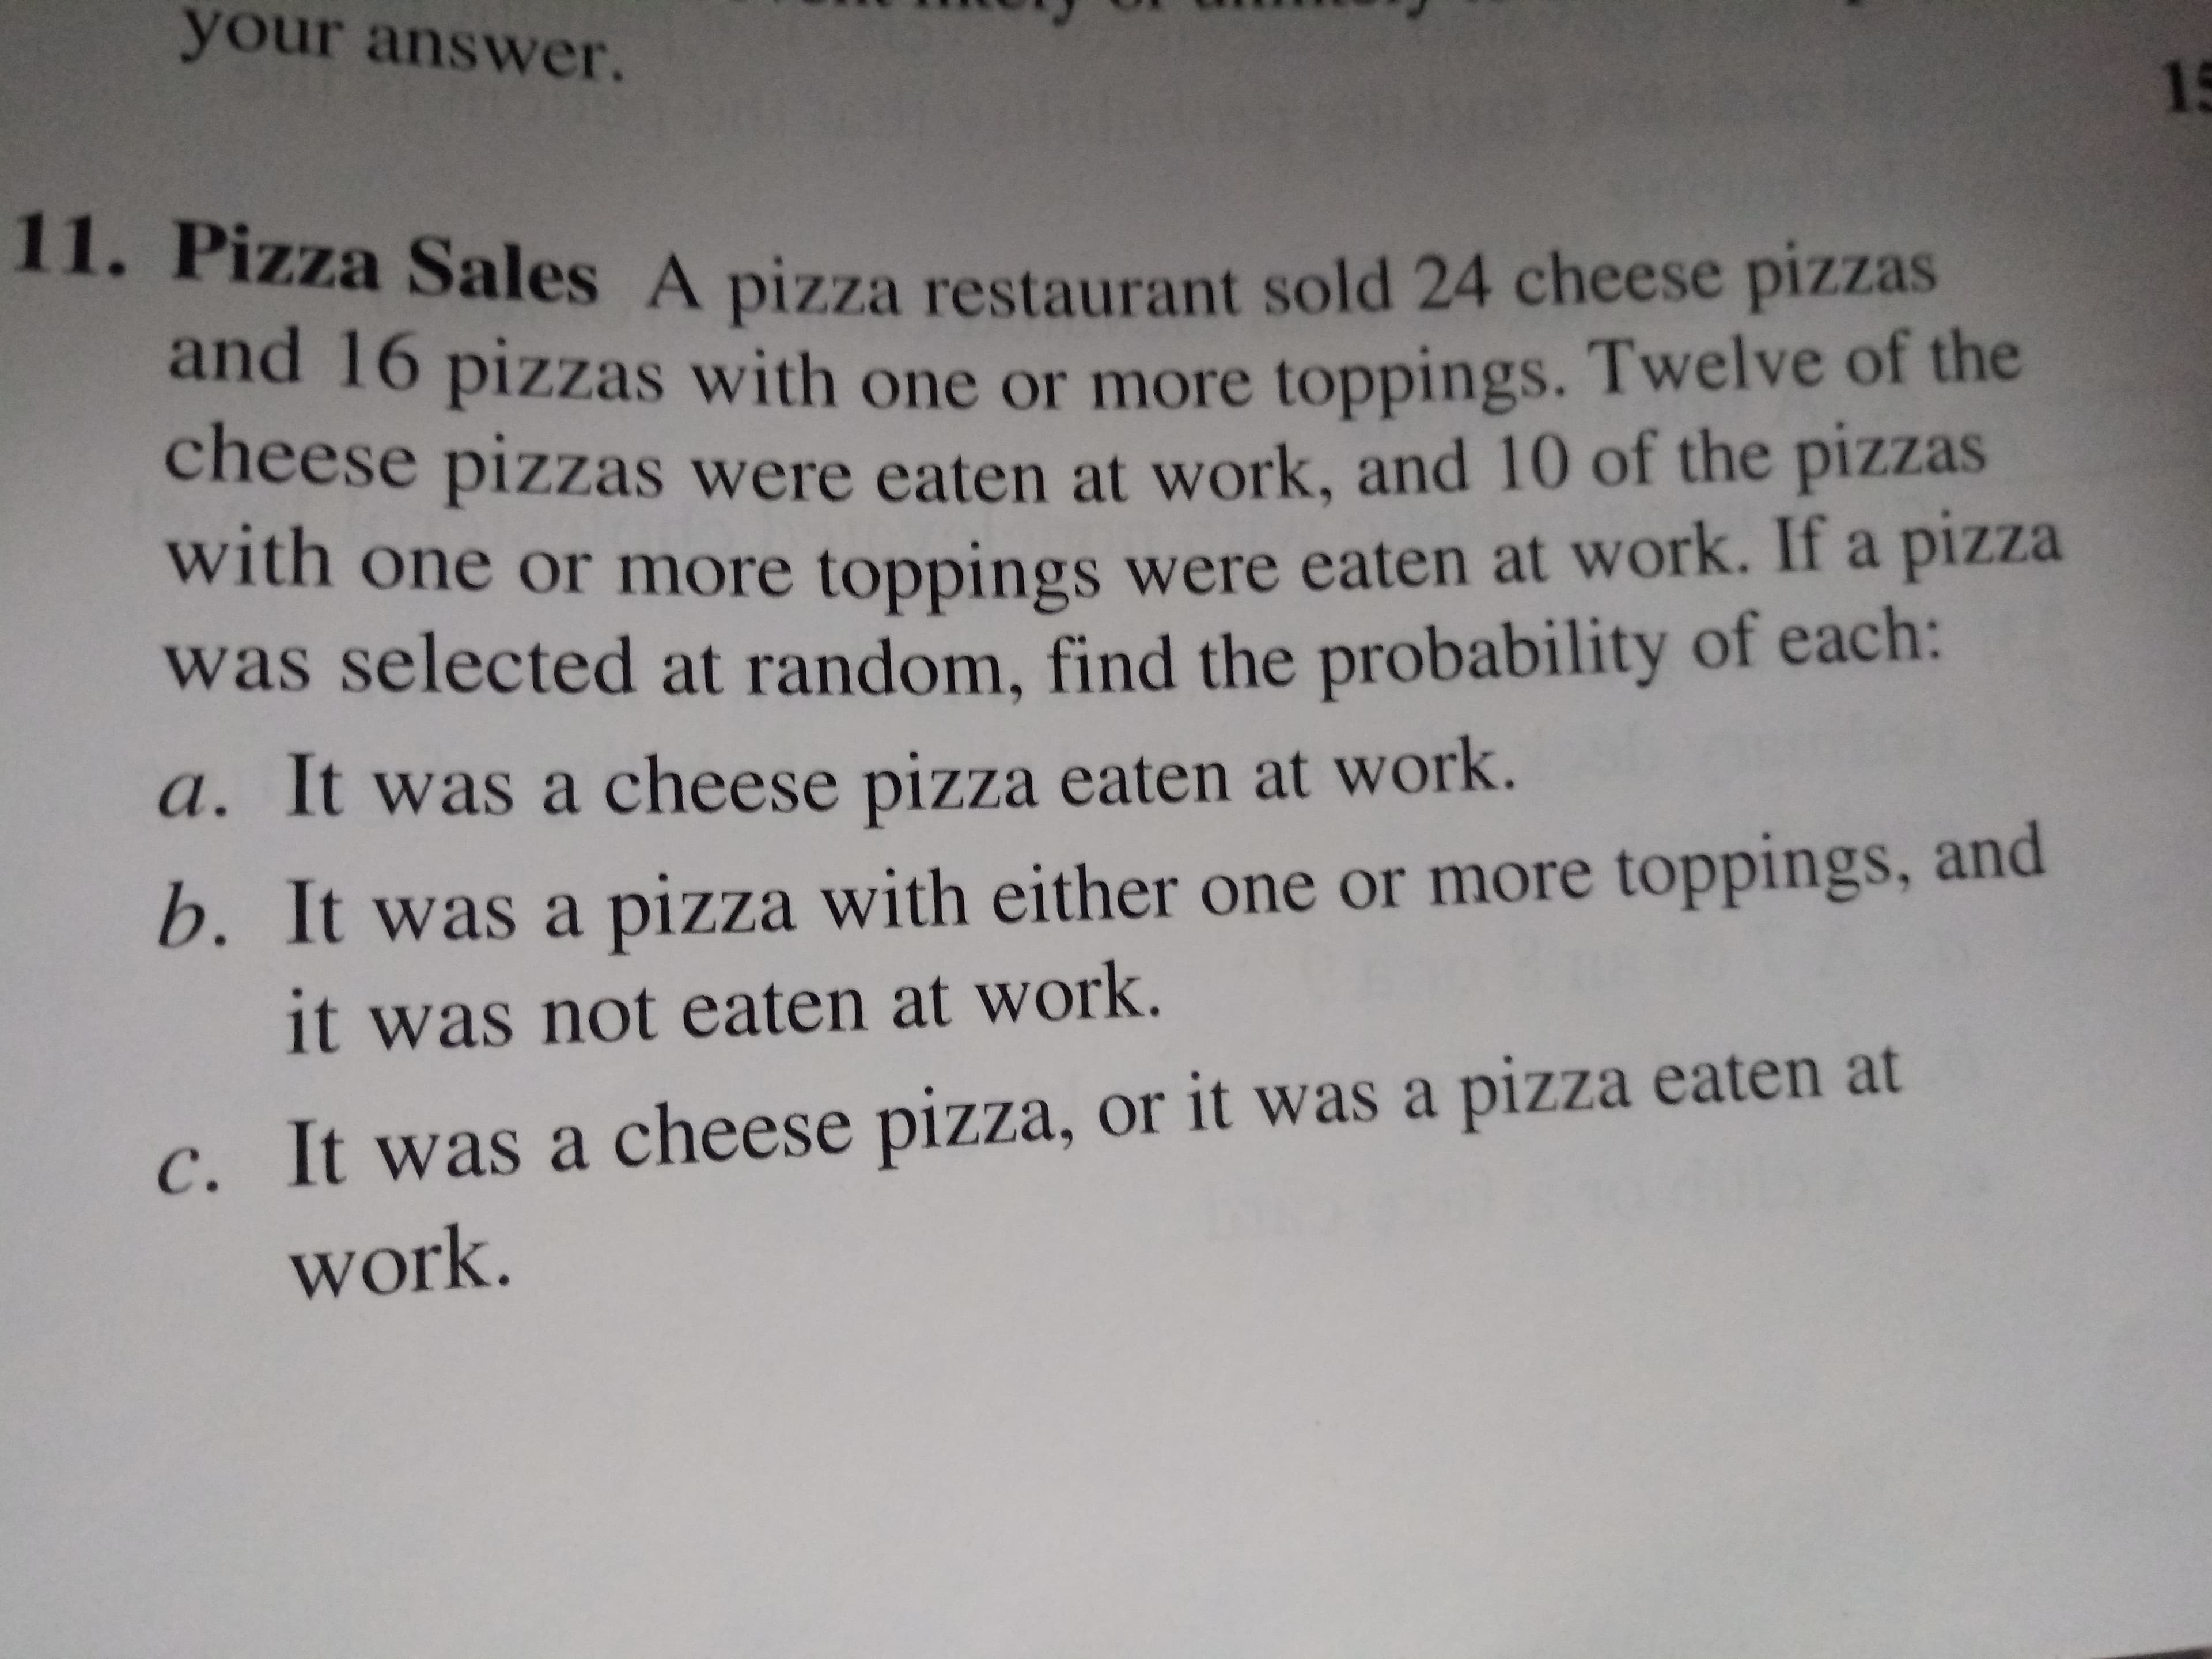 your answer.
15
Zza Sales A pizza restaurant sold 24 cheese pizzas
and 16 pizzas with one or more toppings. Twelve of the
cheese pizzas were eaten at work, and 10 of the pizzas
with one or more toppings were eaten at work. If a pizza
was selected at random, find the probability of each:
a. It was a cheese pizza eaten at work.
b. It was a pizza with either one or more toppings, and
it was not eaten at work.
C. It was a cheese pizza, or it was a pizZza eaten at
work.
